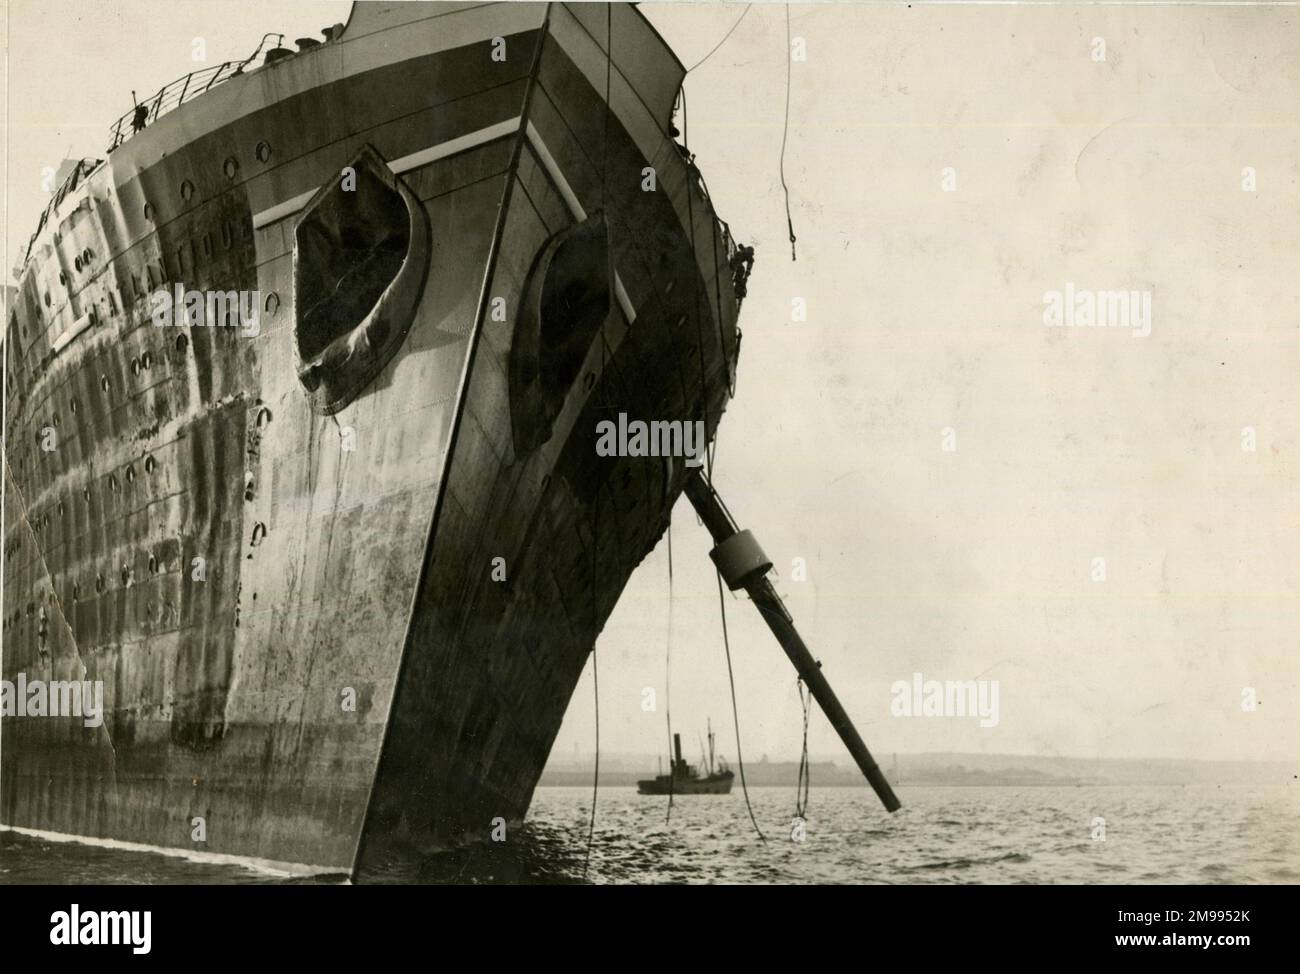 L'Atlantique, French luxury liner, towed home in a battered state into Cherbourg harbour, Northern France, January 1933. Stock Photo